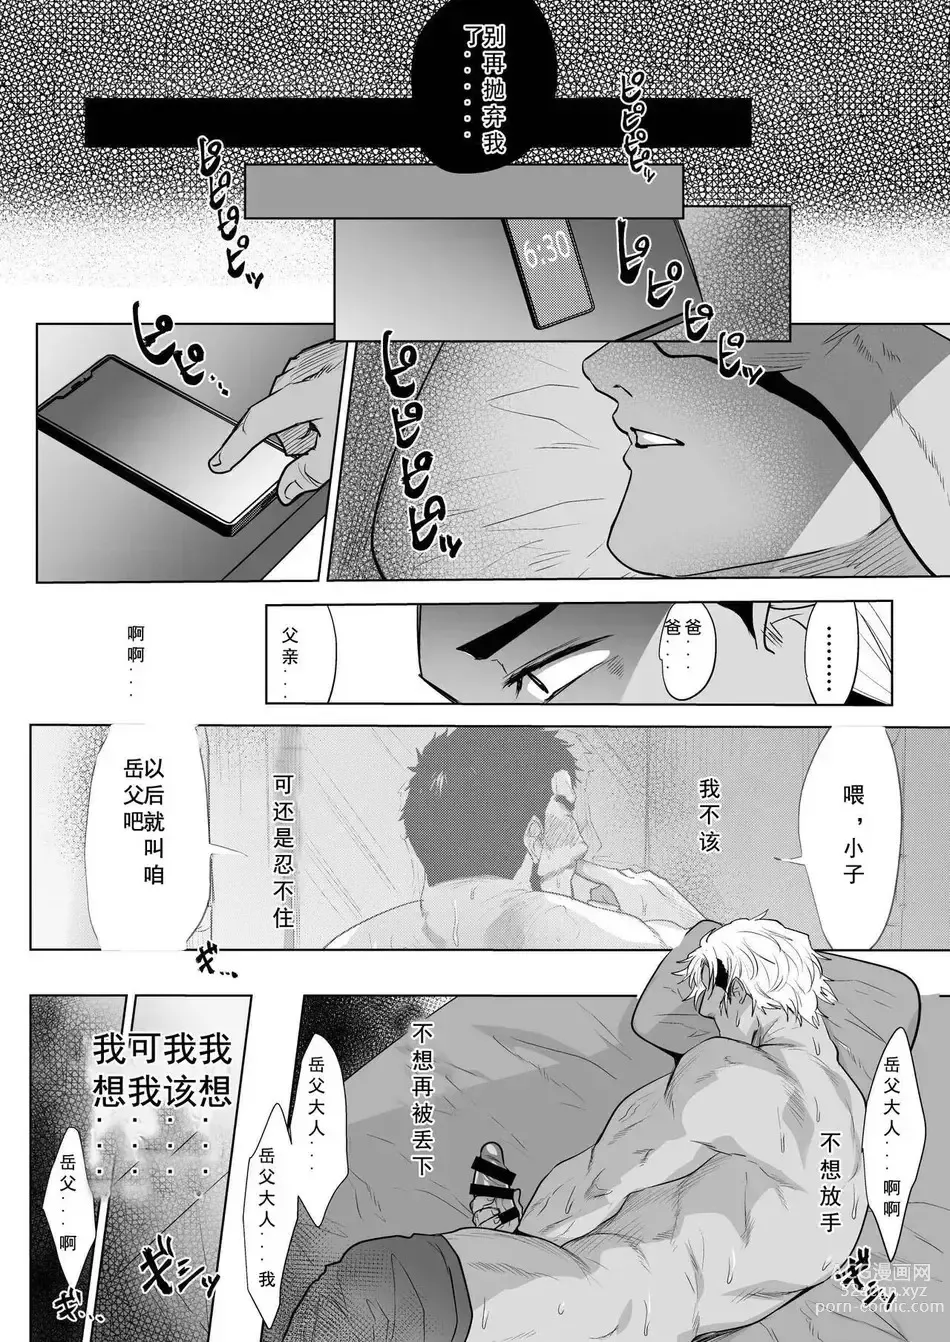 Page 3 of doujinshi My Stepfather 2